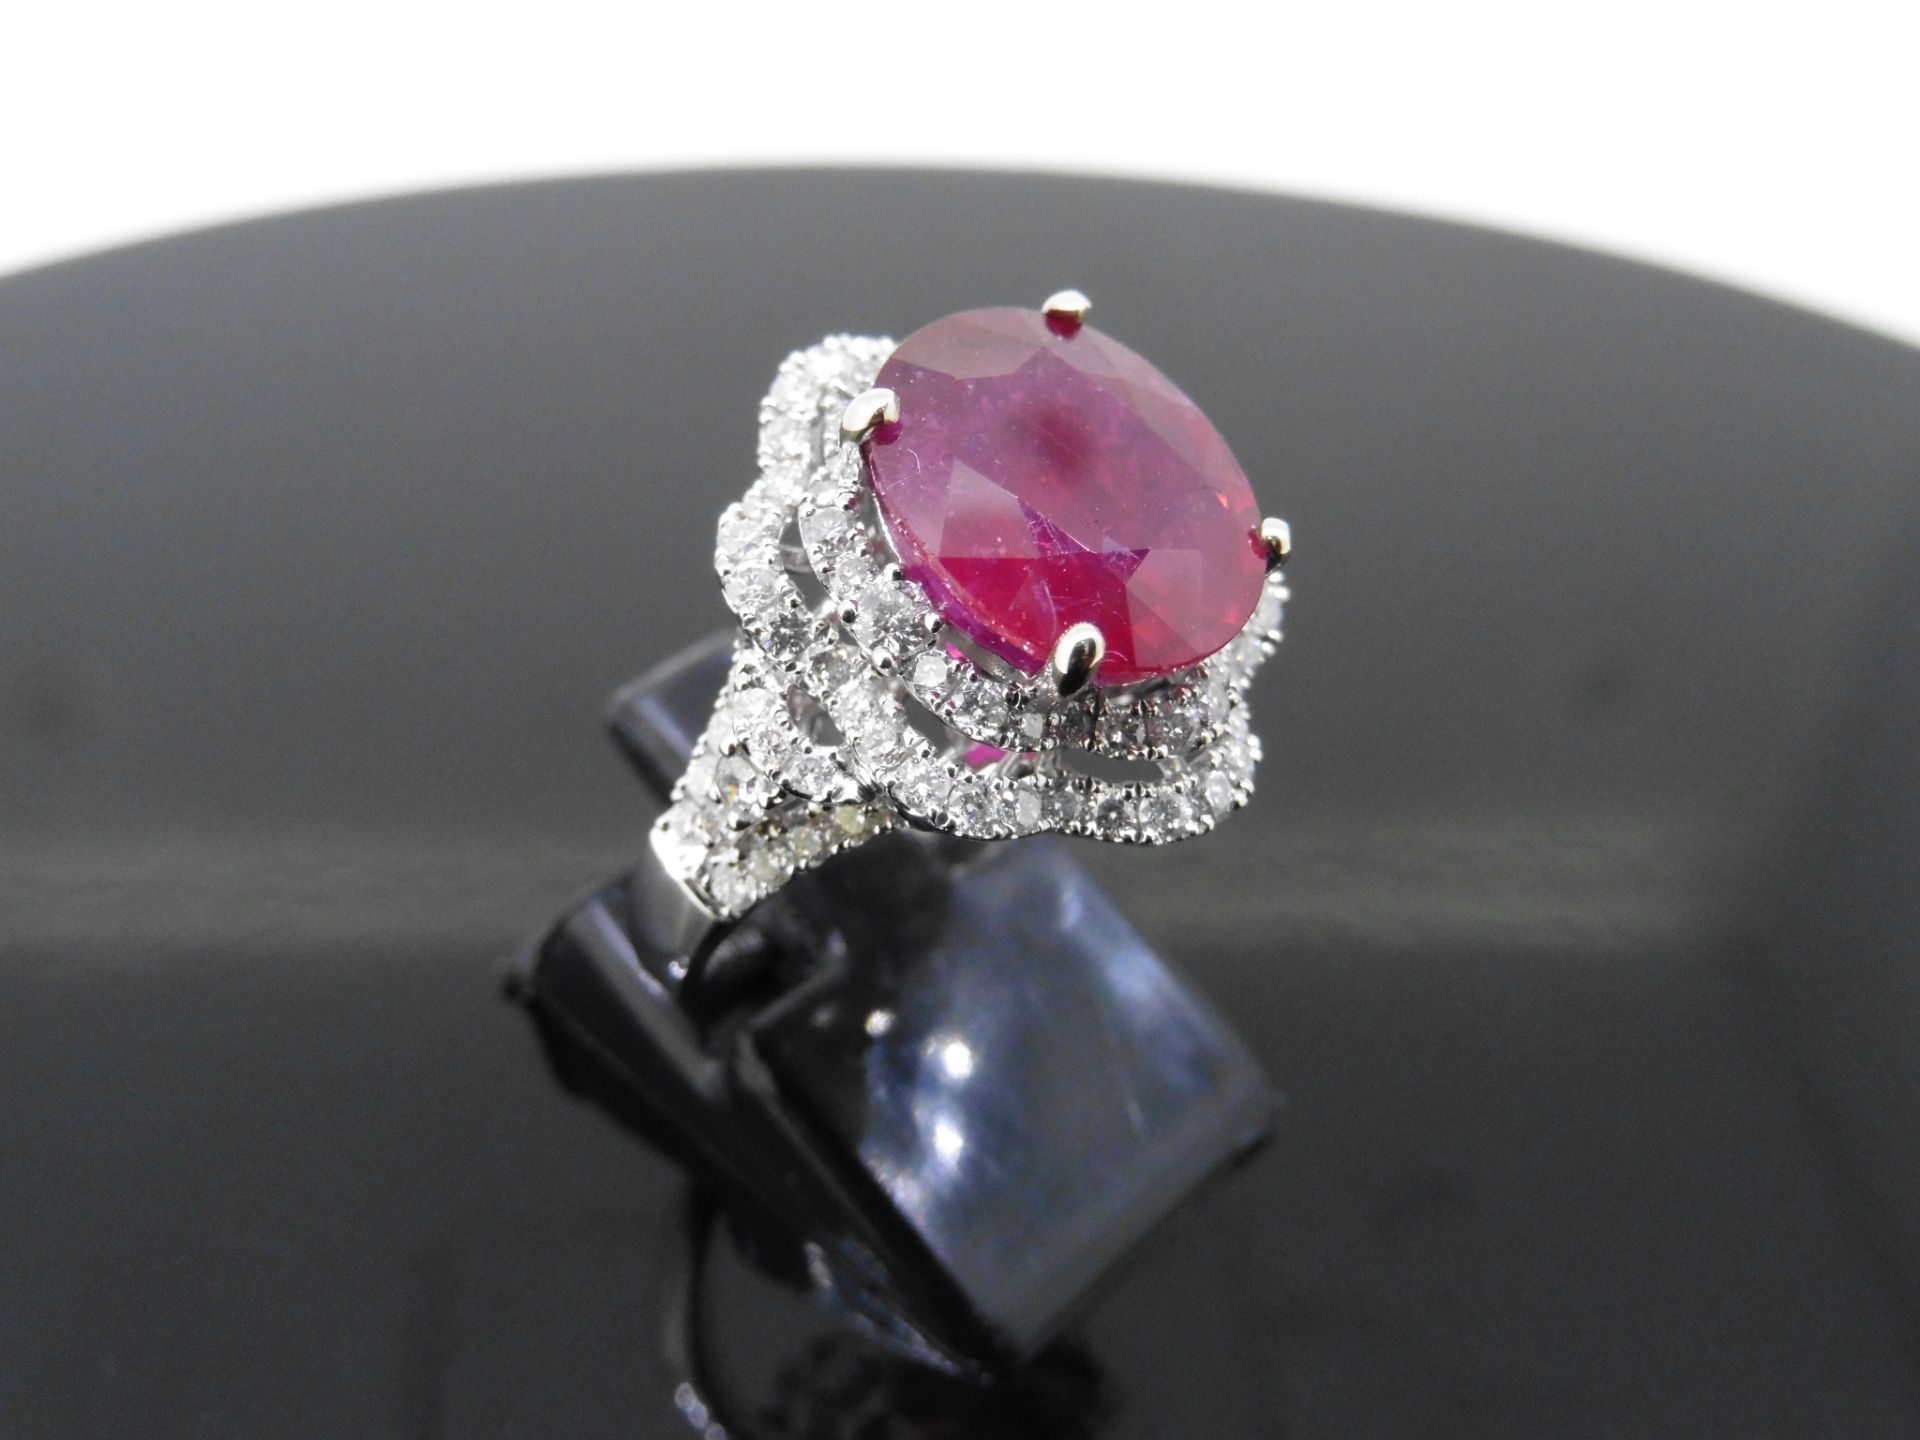 5.61ct Ruby and diamond fancy dress ring. Oval cut ruby ( treated ) set in a four claw setting